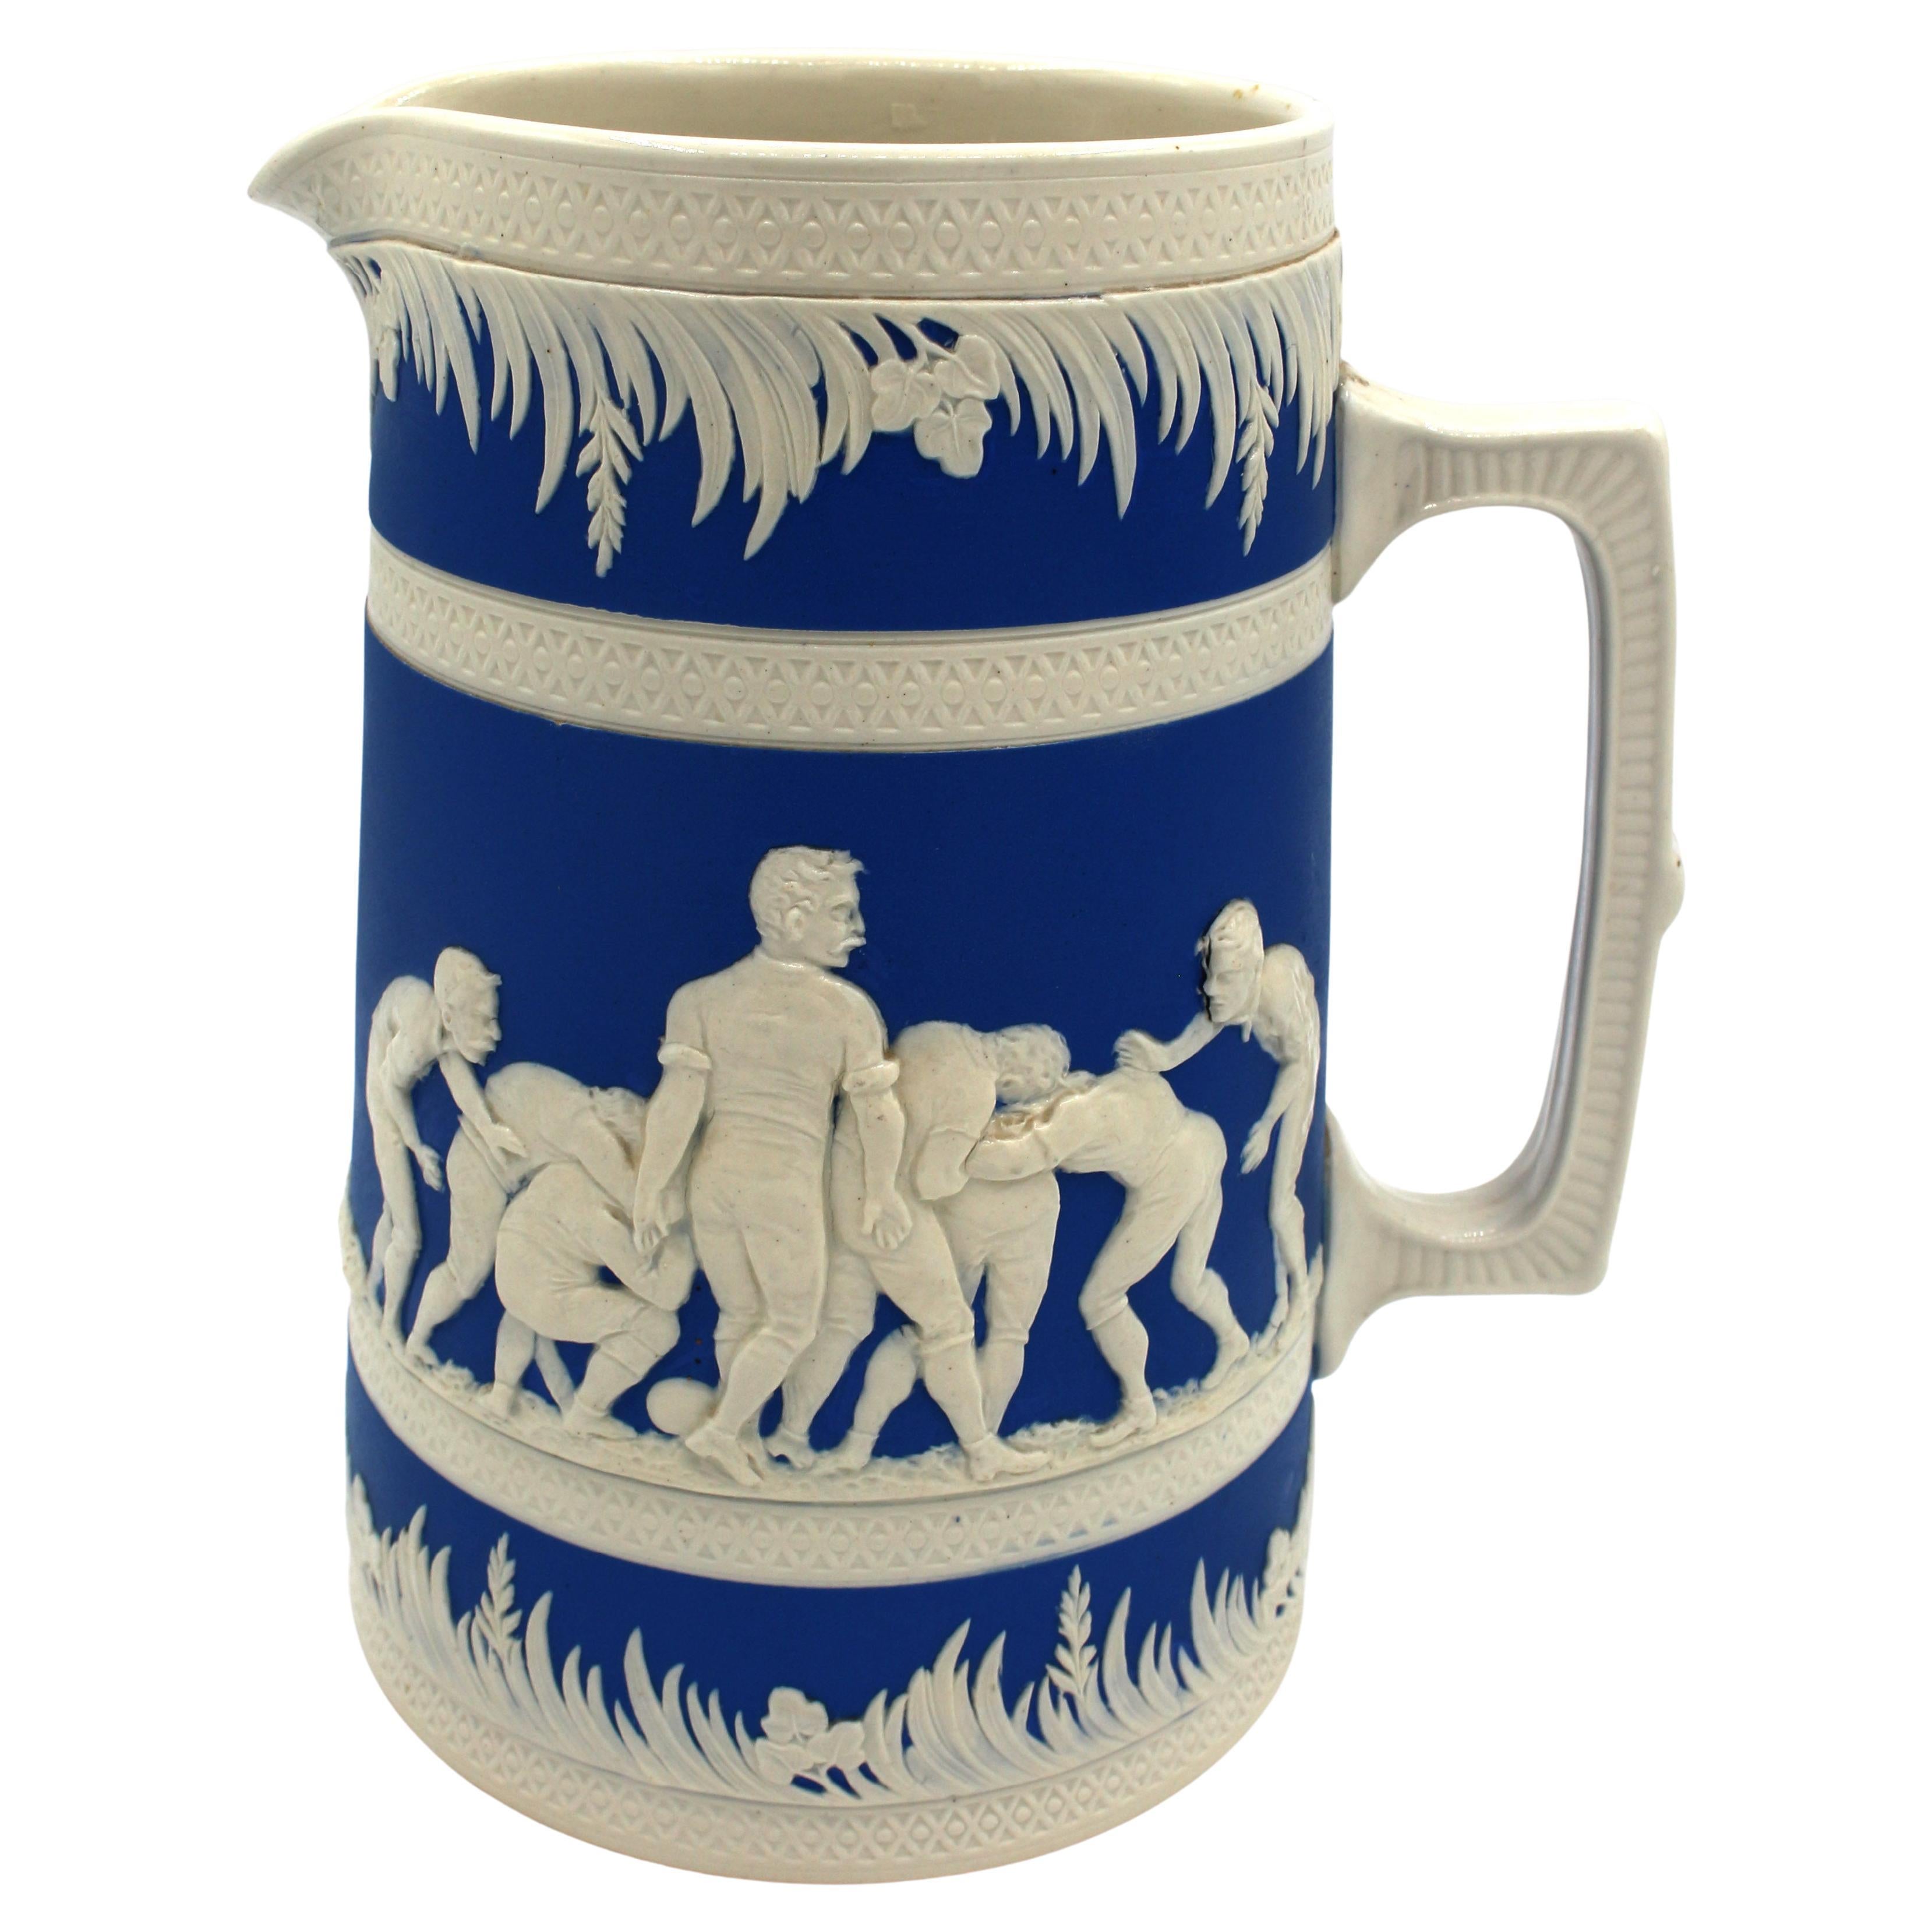 Marked 1895 American Football Motif Ceramic Pitcher by Copeland